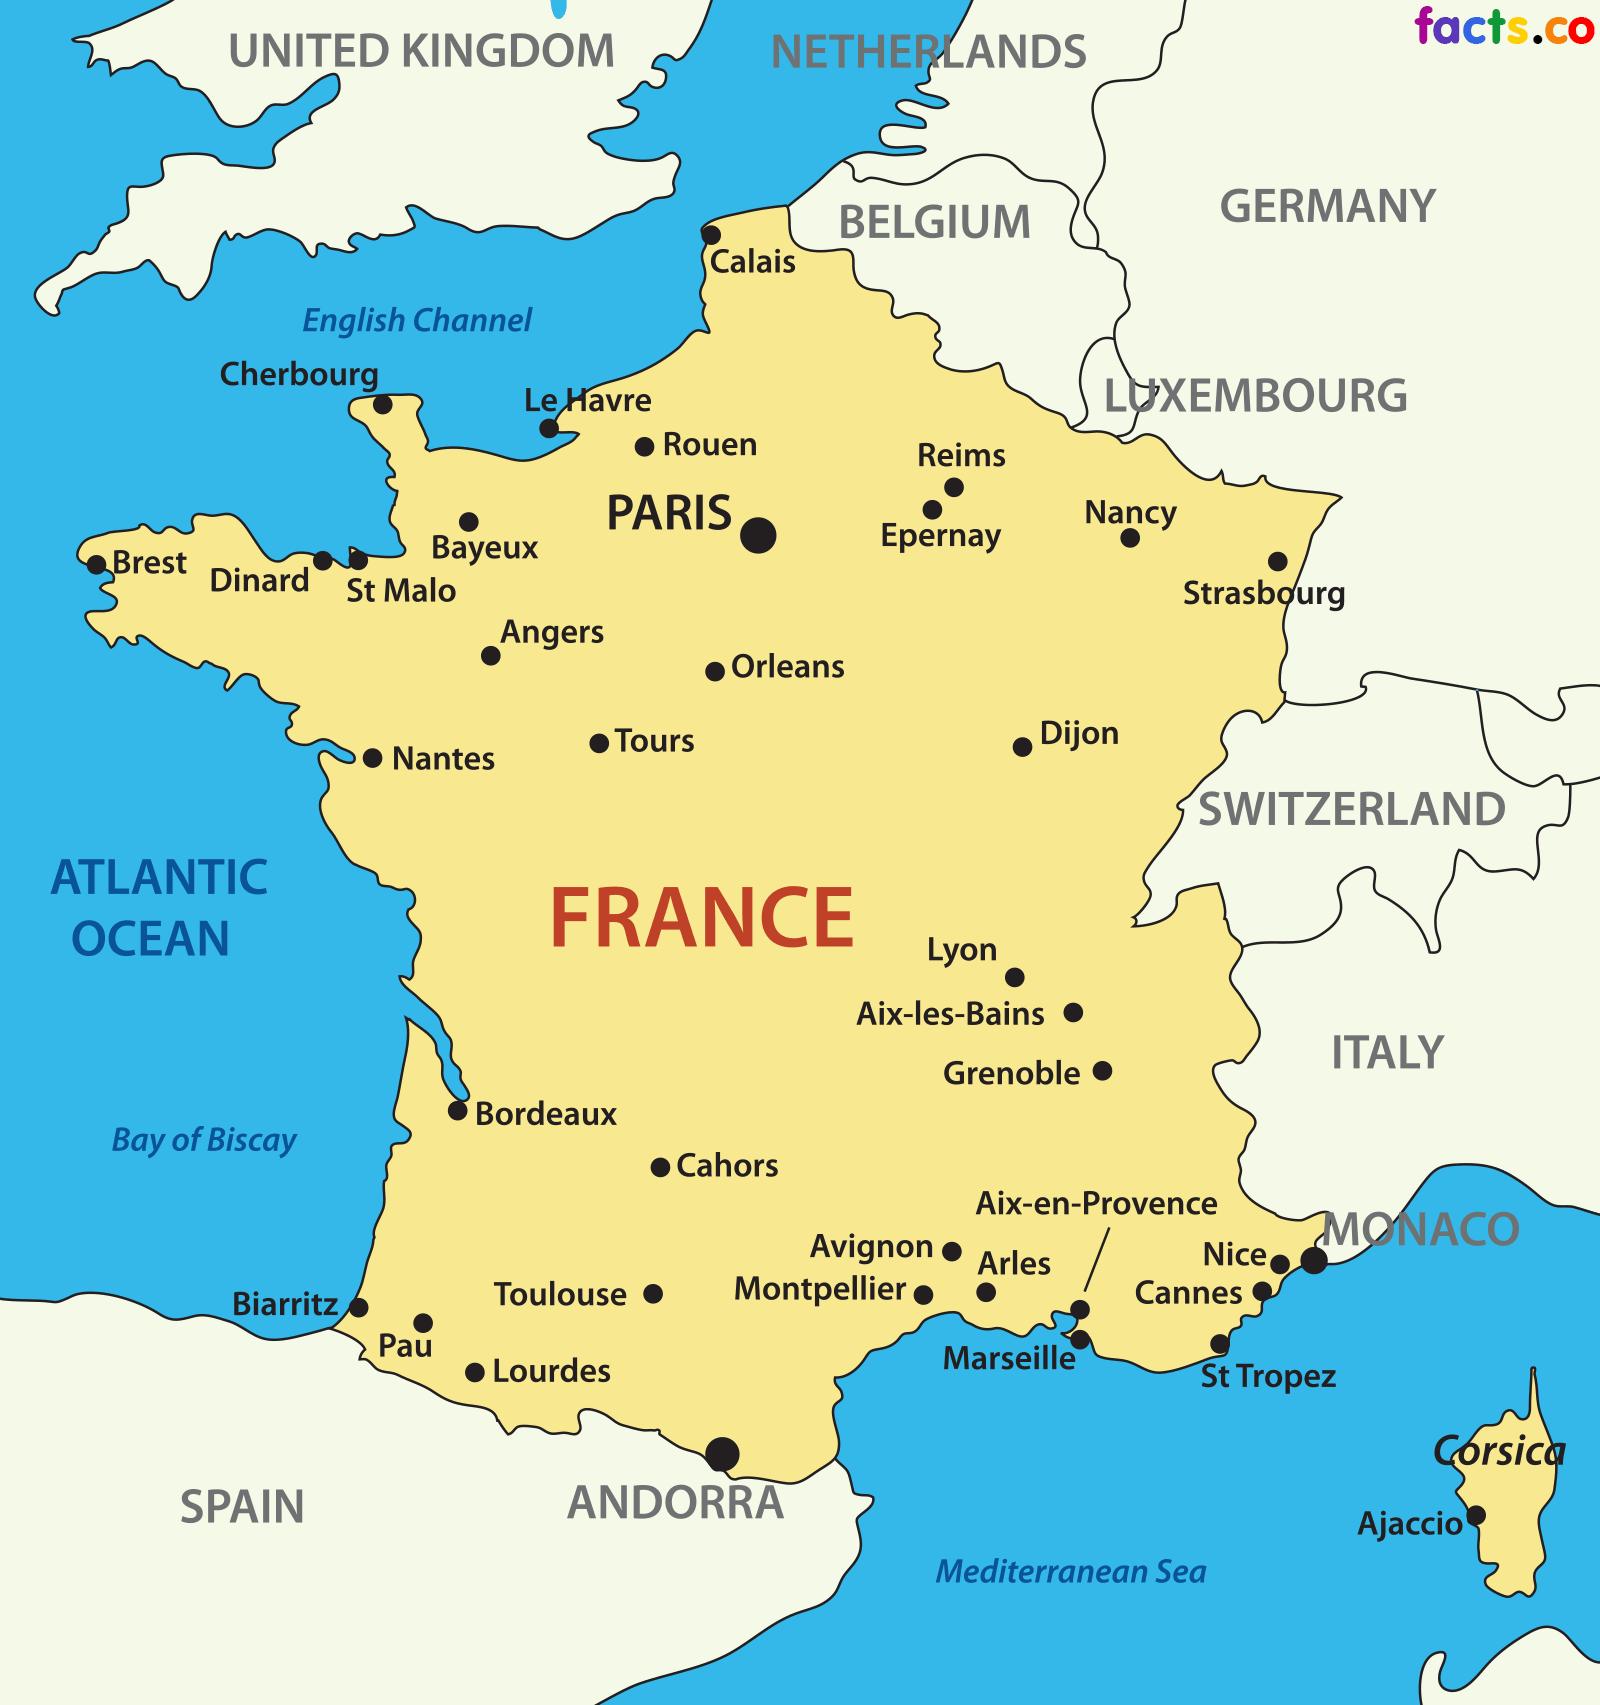 France Country Map - Map Of France Country (Western Europe - Europe)